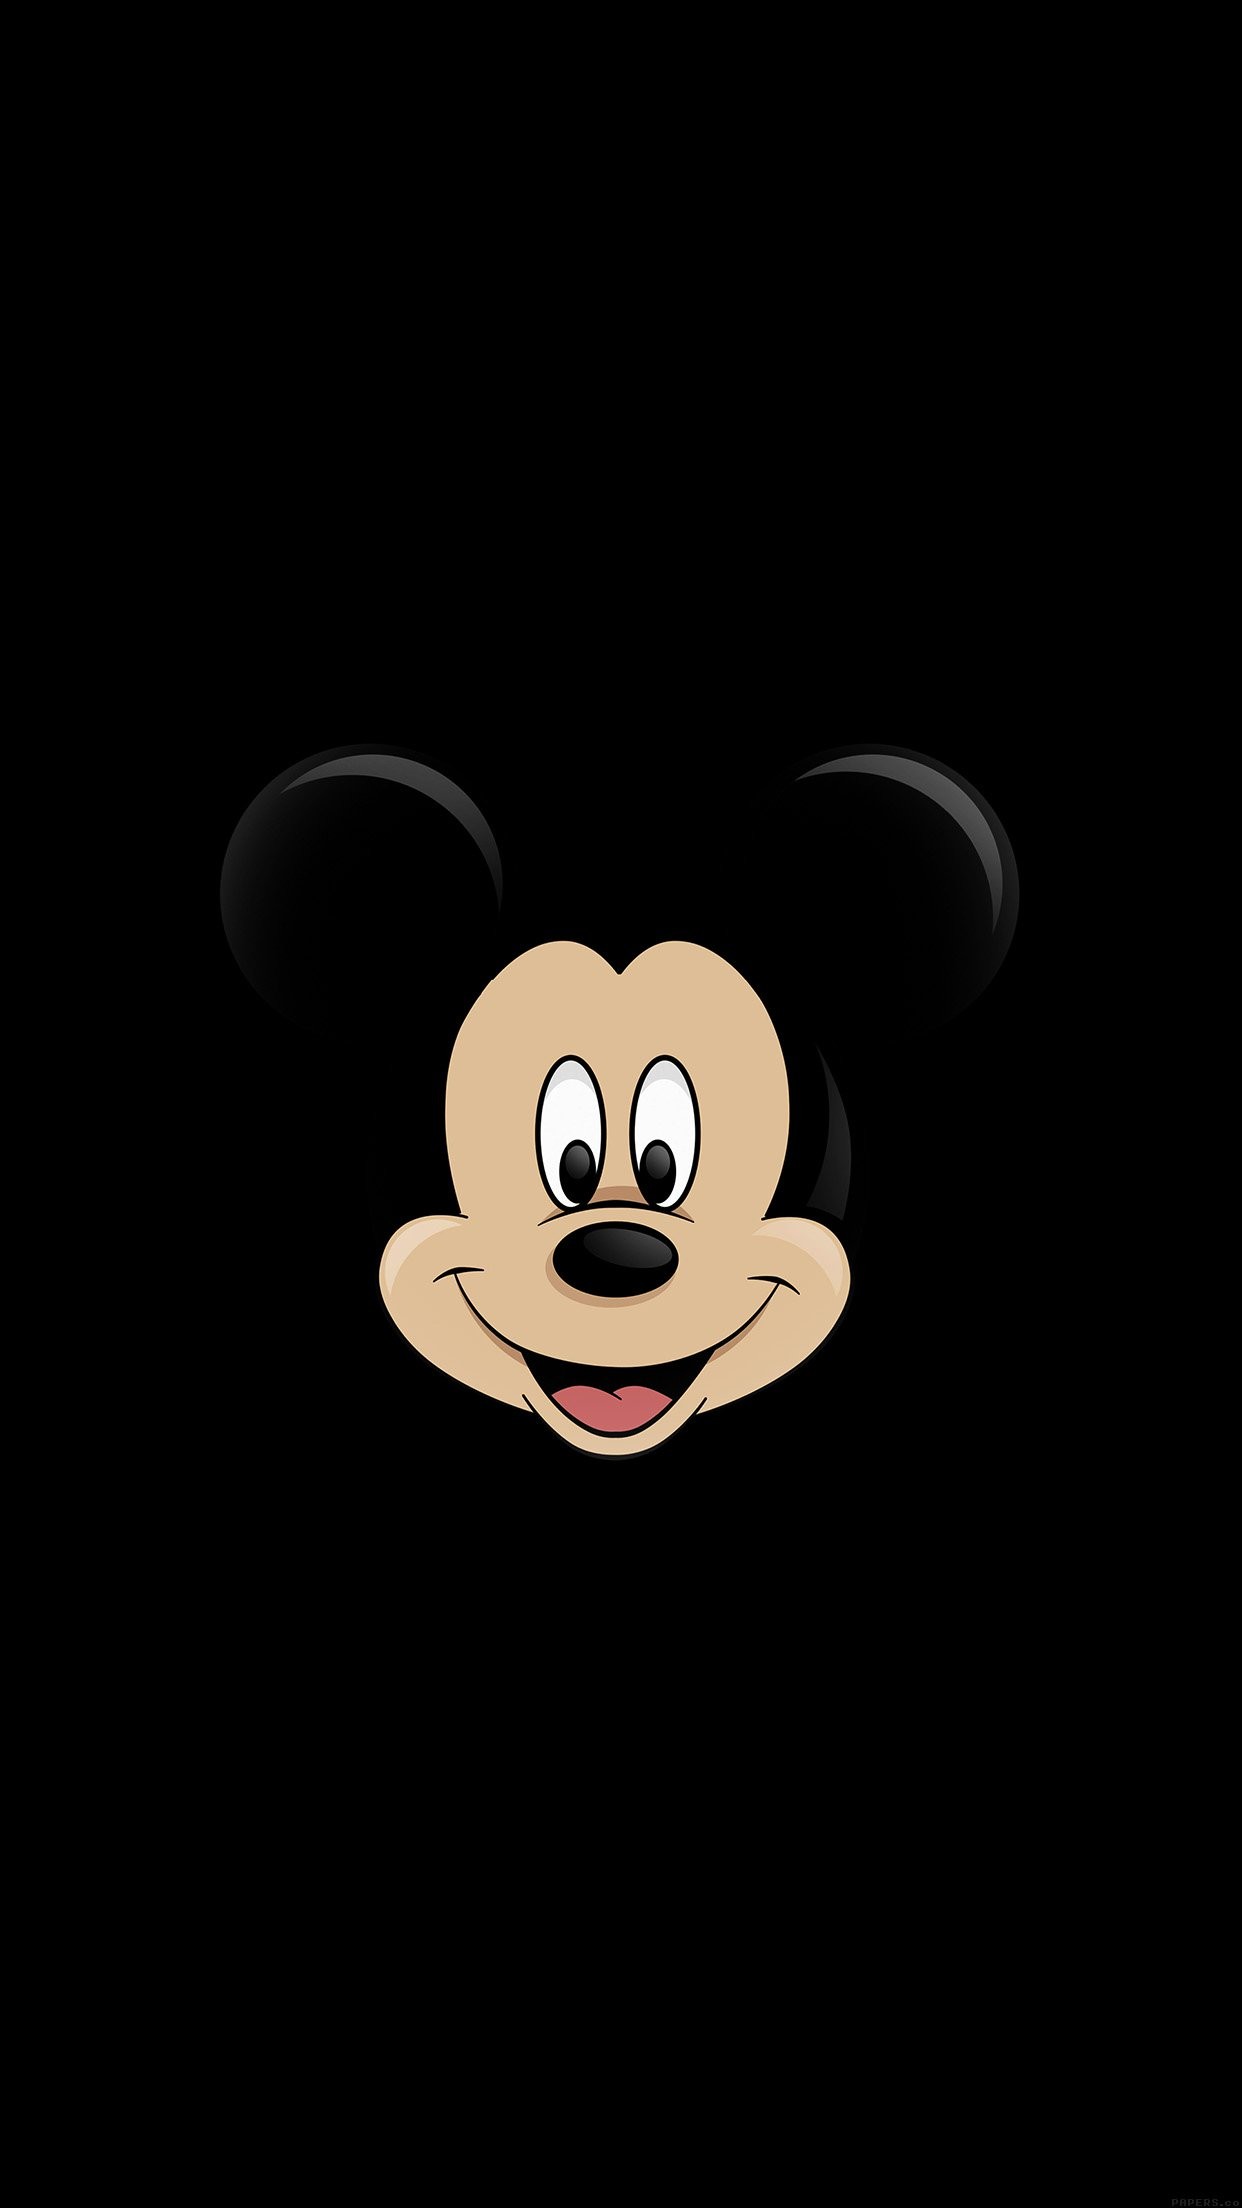 1242x2208, Iphone 6 - Mickey Mouse Wallpaper A3s - HD Wallpaper 